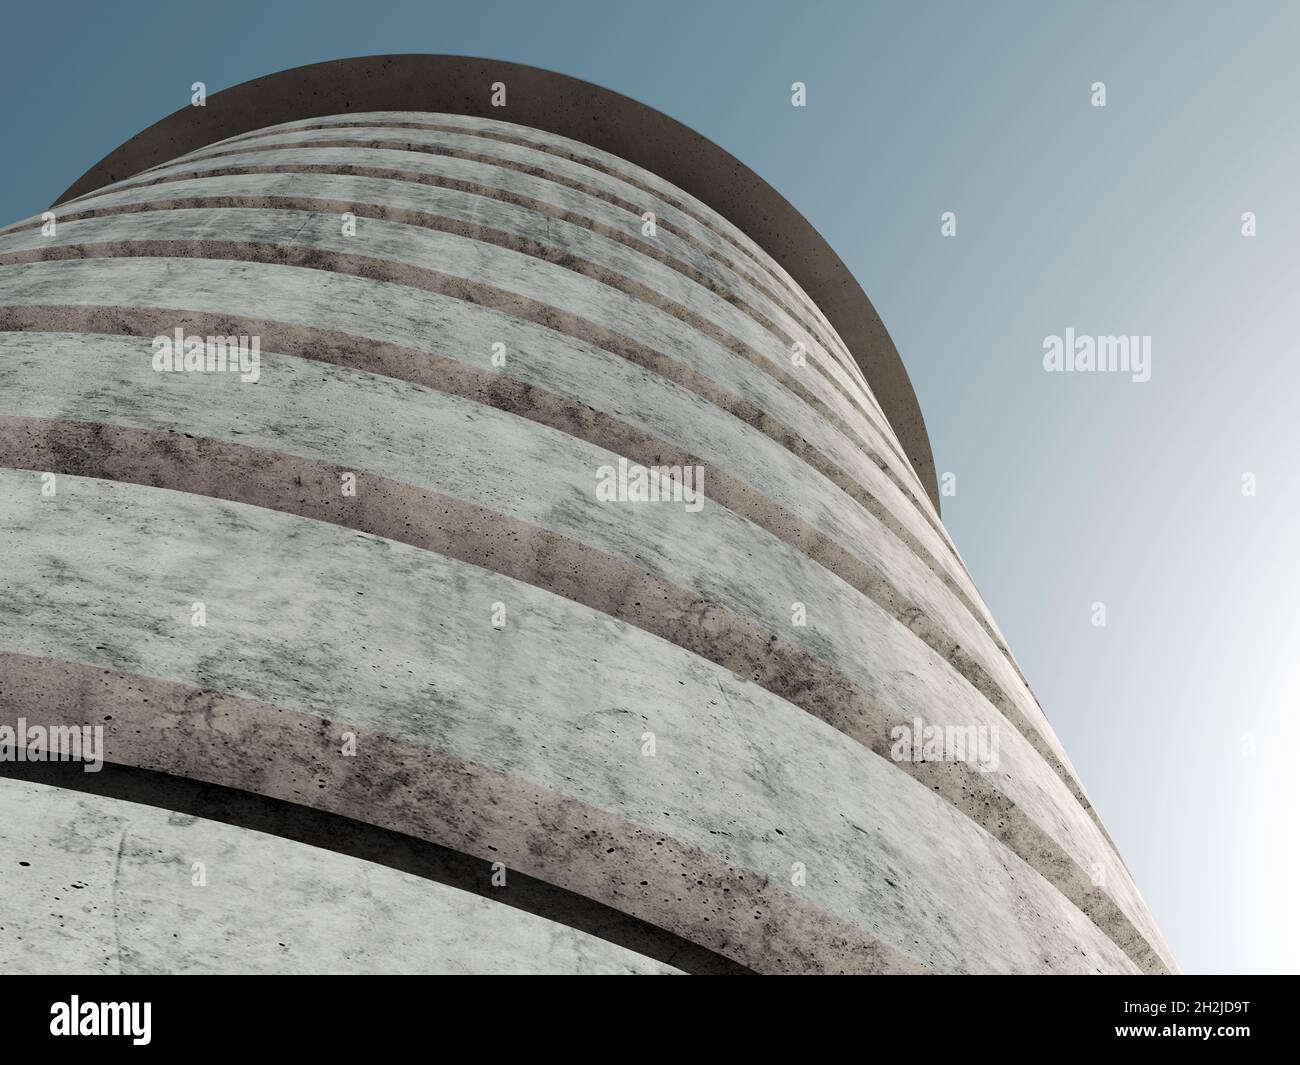 Concrete tower exterior under blue sky on a daytime, abstract architectural fragment of spiral ramp. 3d rendering illustration Stock Photo